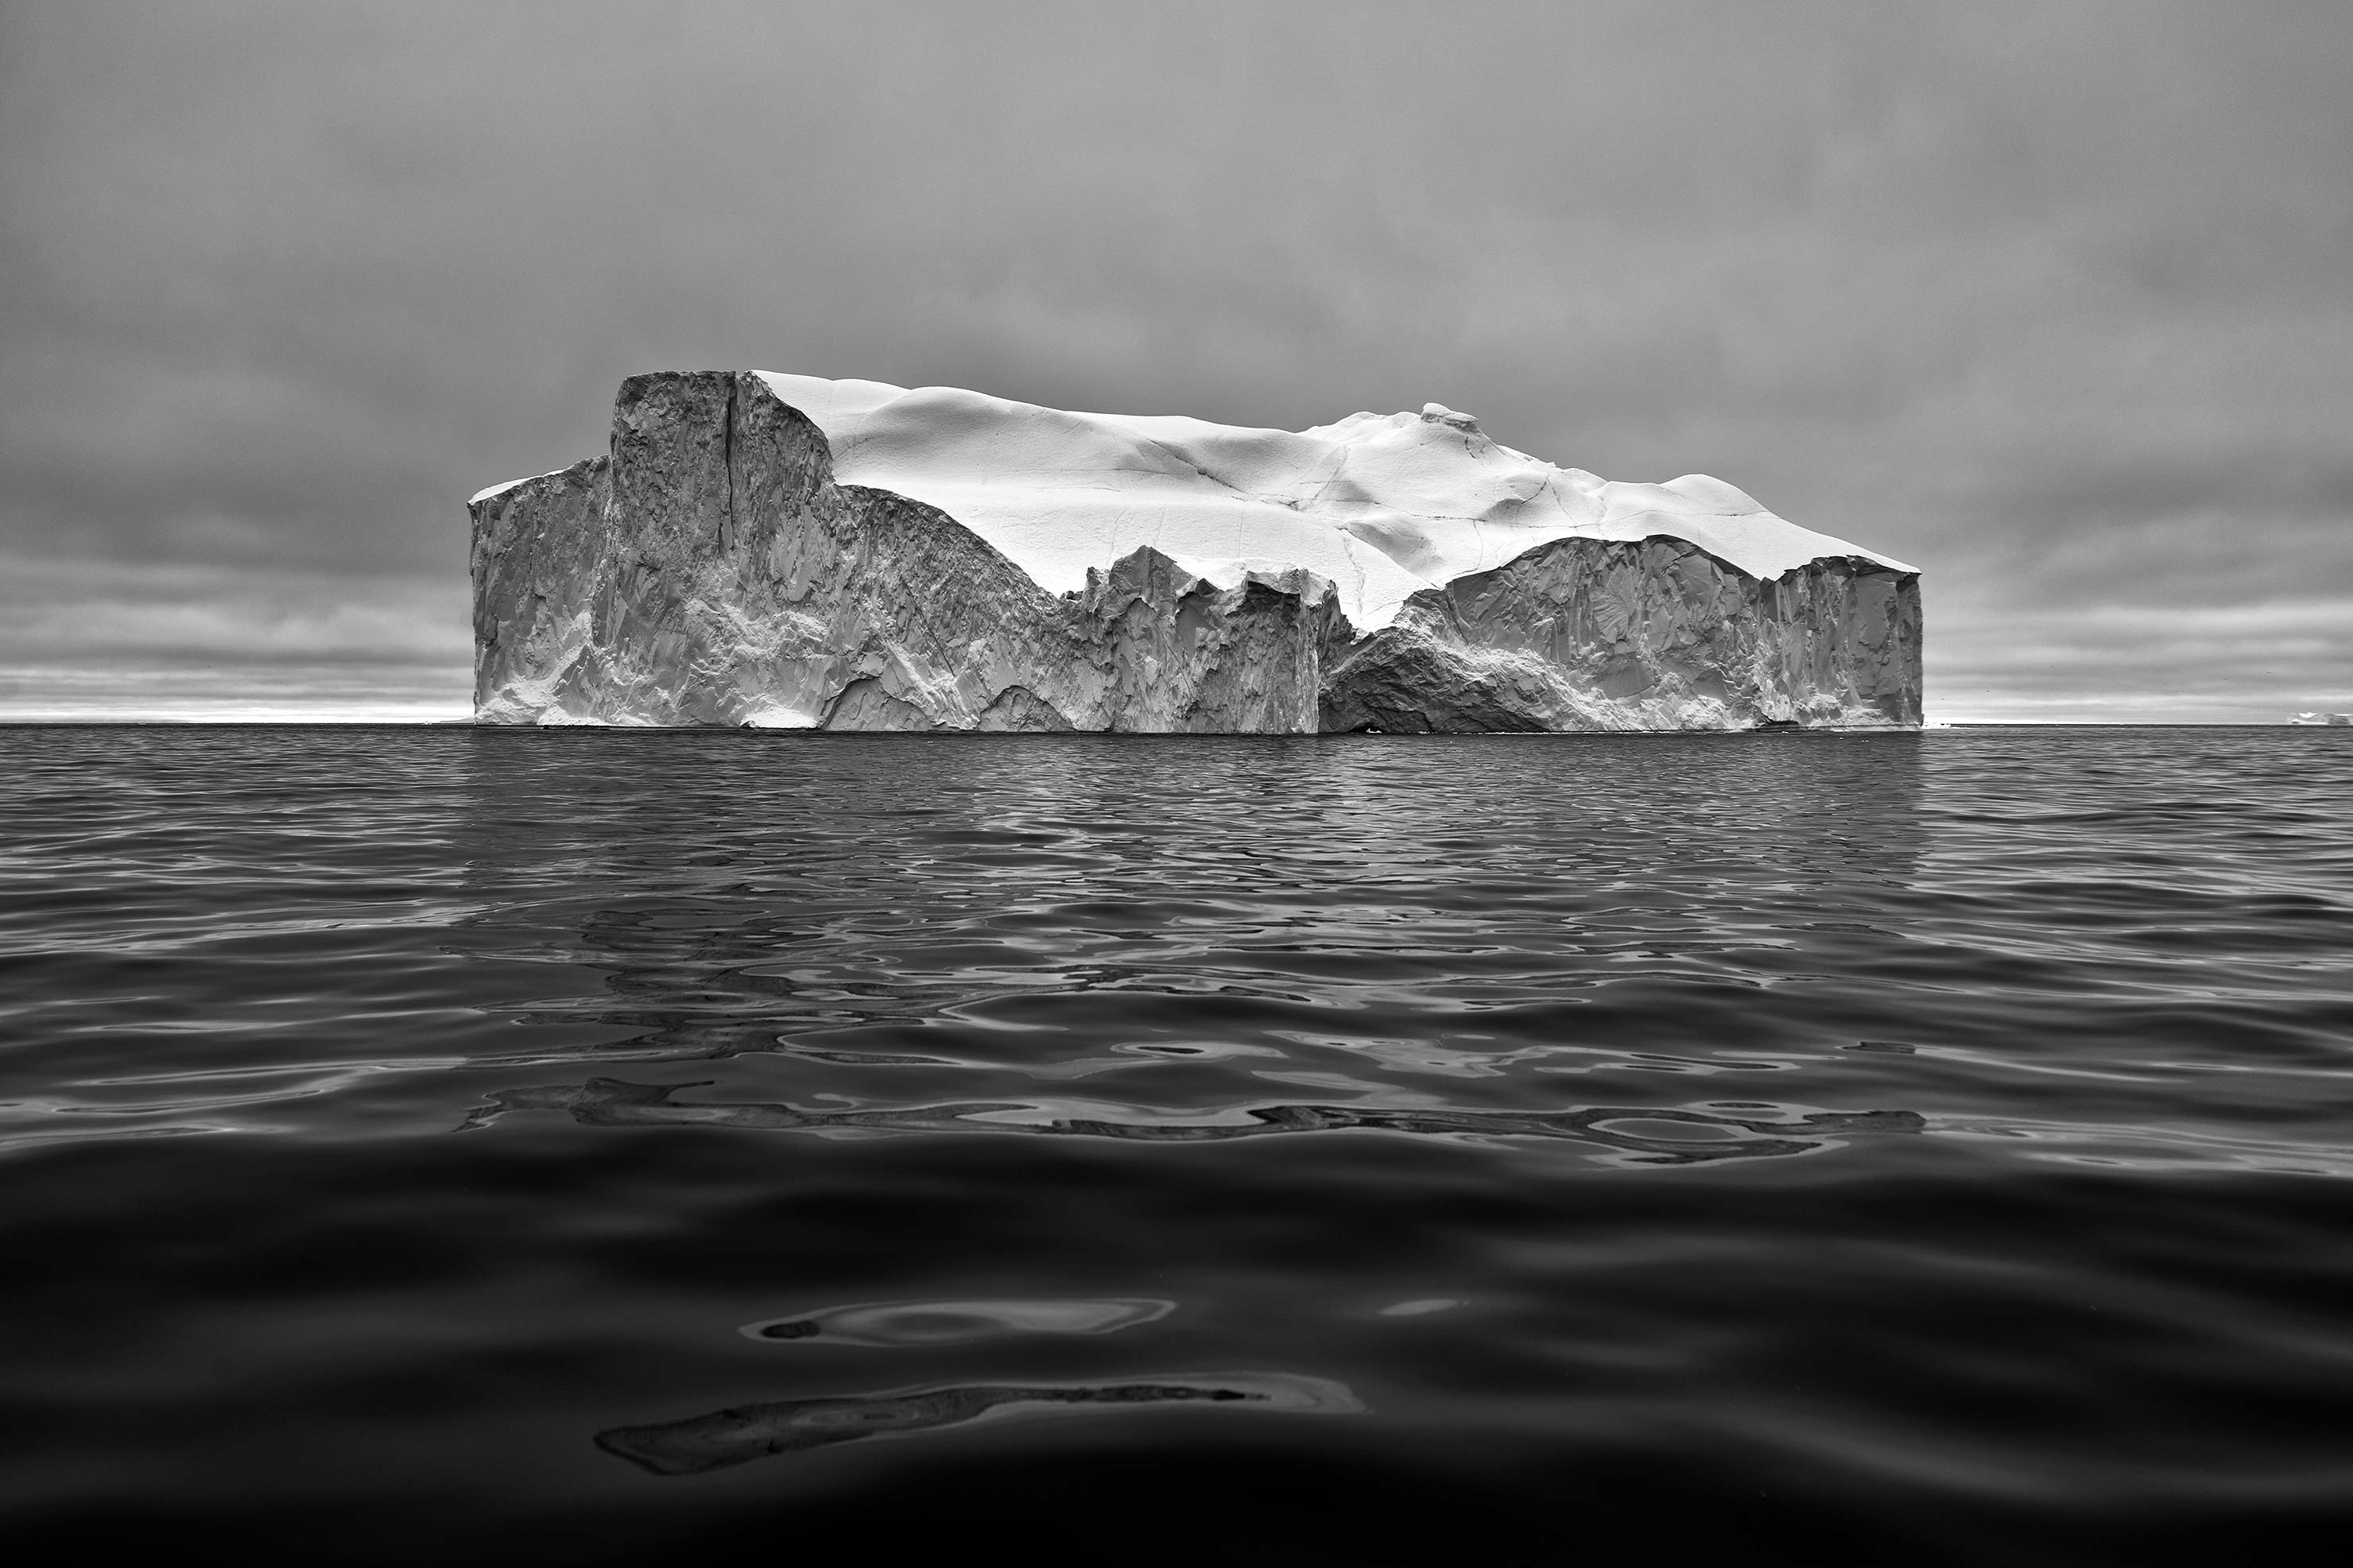 Review : Shooting Icebergs the Phase One iQ3 Achromatic 100MP Digital Back | Paul Reiffer - Photographer